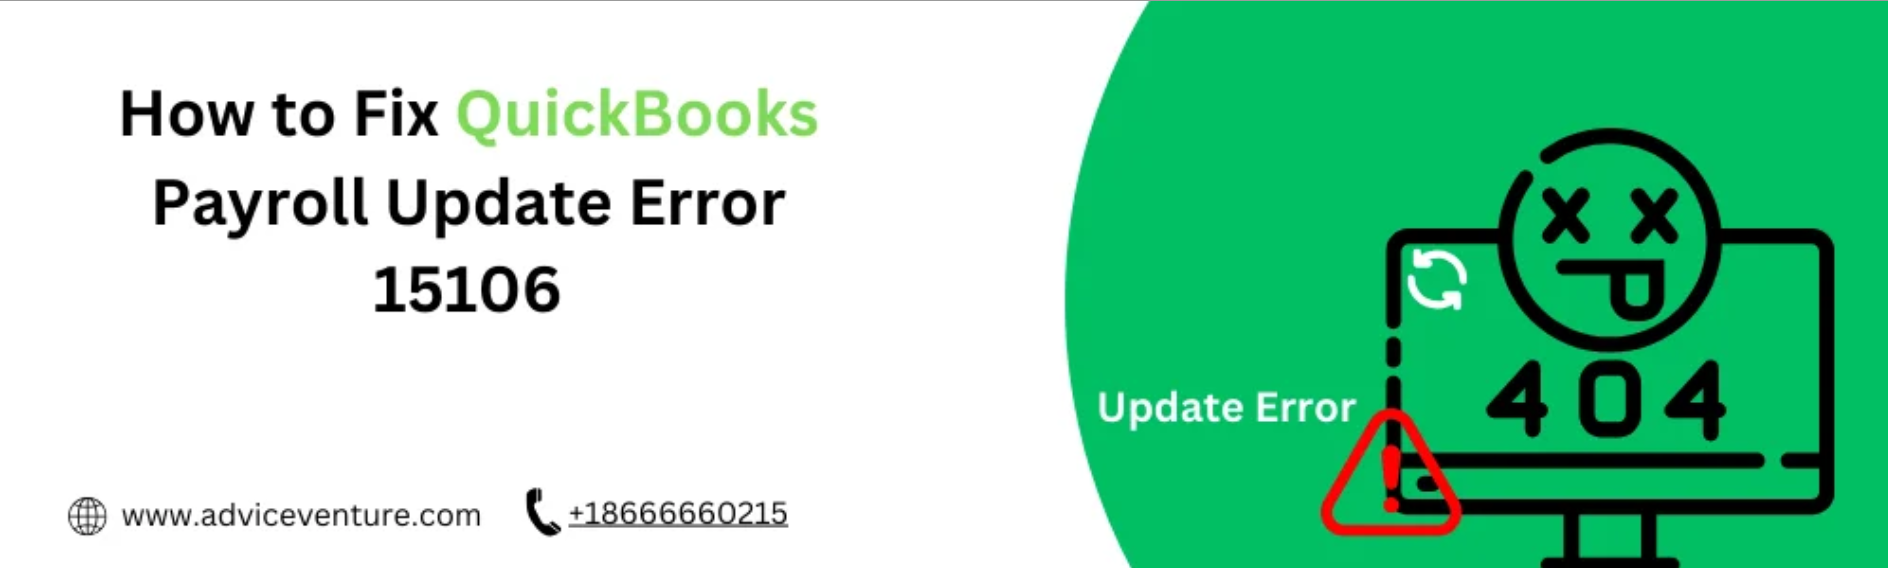 How to Fix QuickBooks Payroll Update Error 15106 - Boston Other